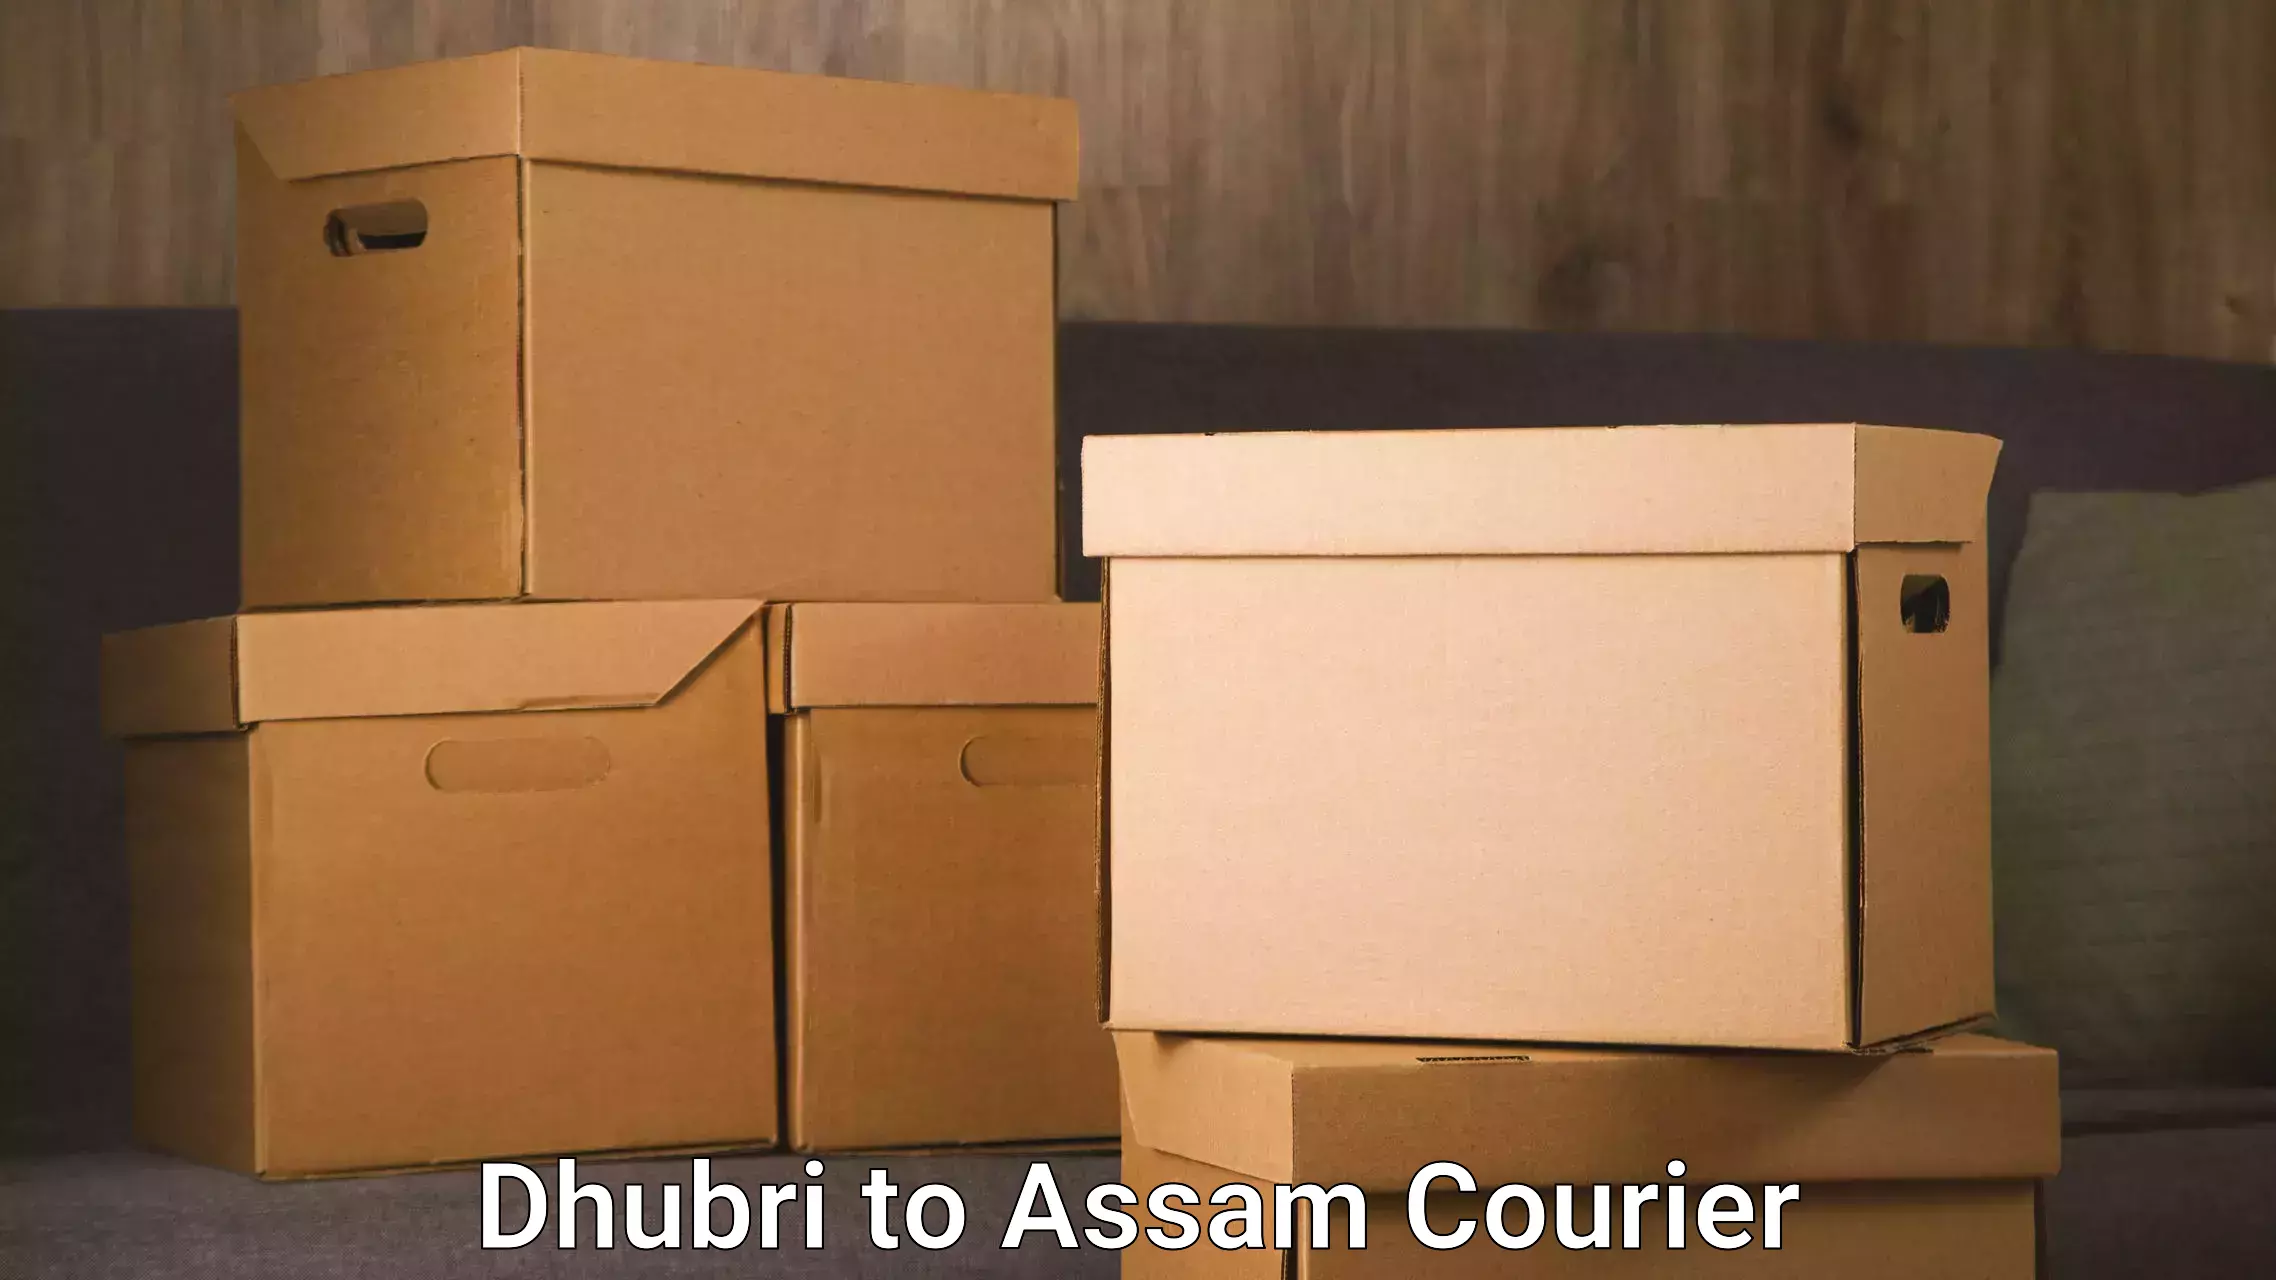 Customizable delivery plans Dhubri to Dhupdhara